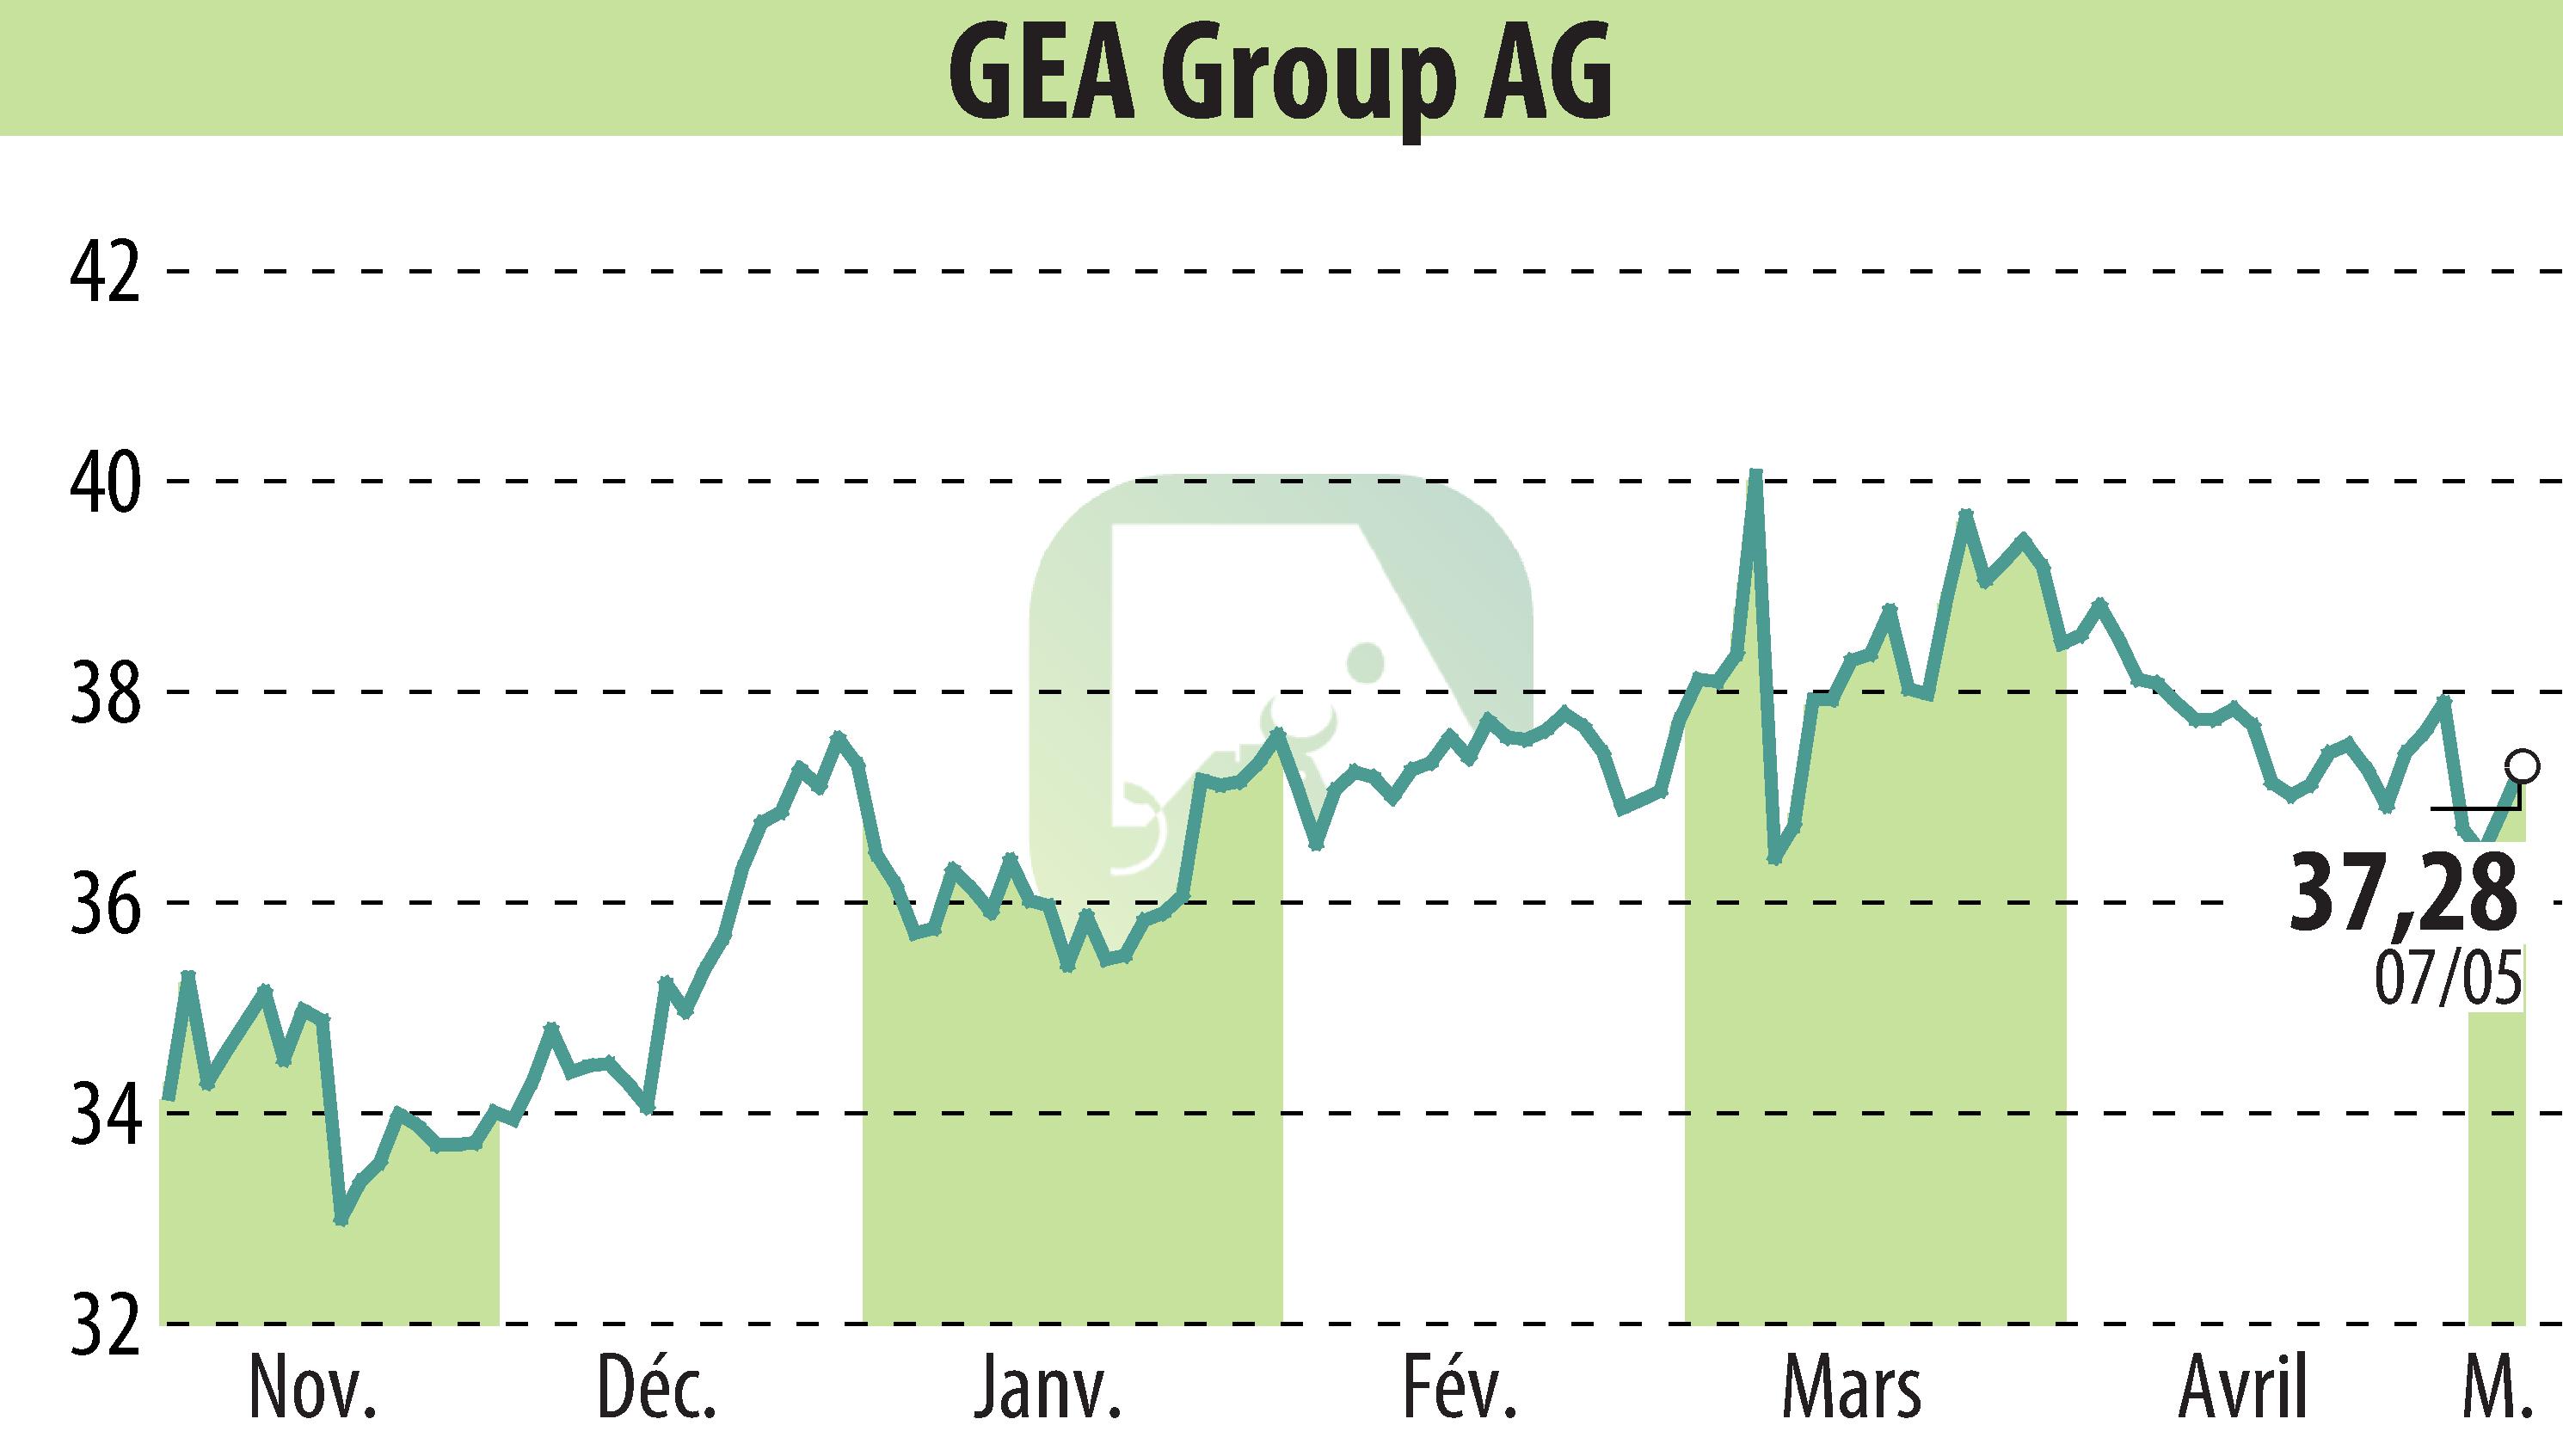 Stock price chart of GEA Group Aktiengesellschaft (EBR:G1A) showing fluctuations.